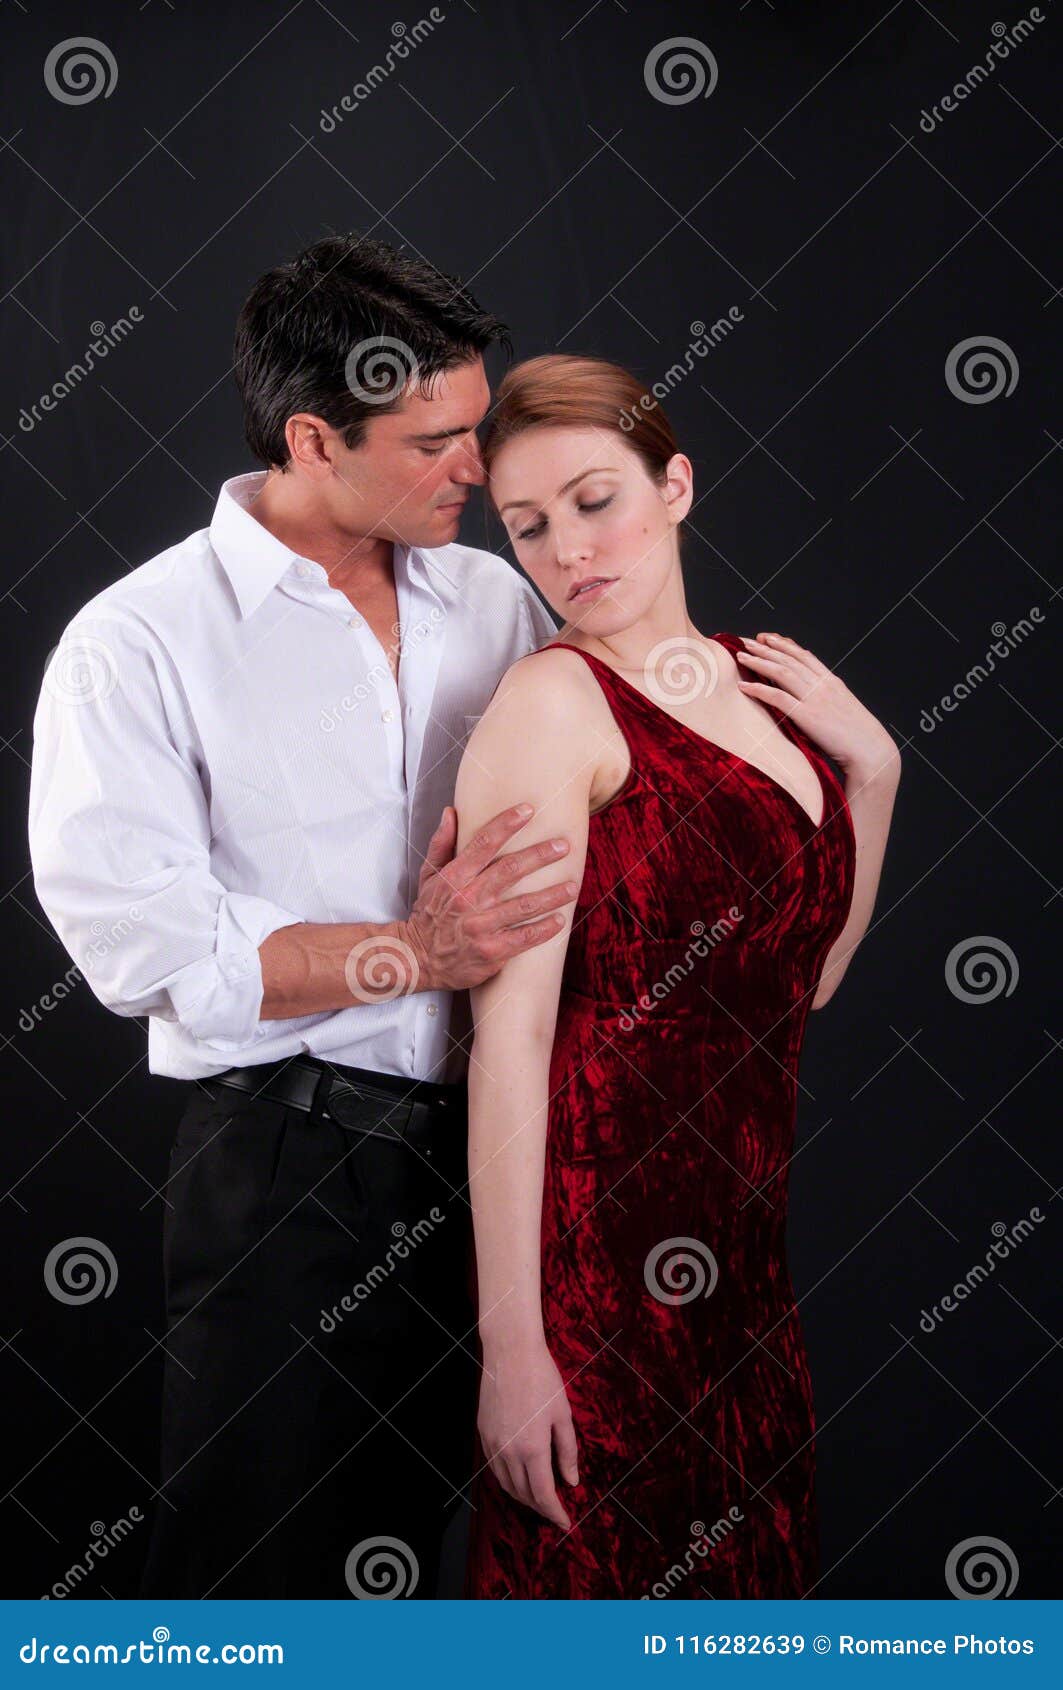 Formal dance | Photo poses for couples, Couple photos, Couple photography